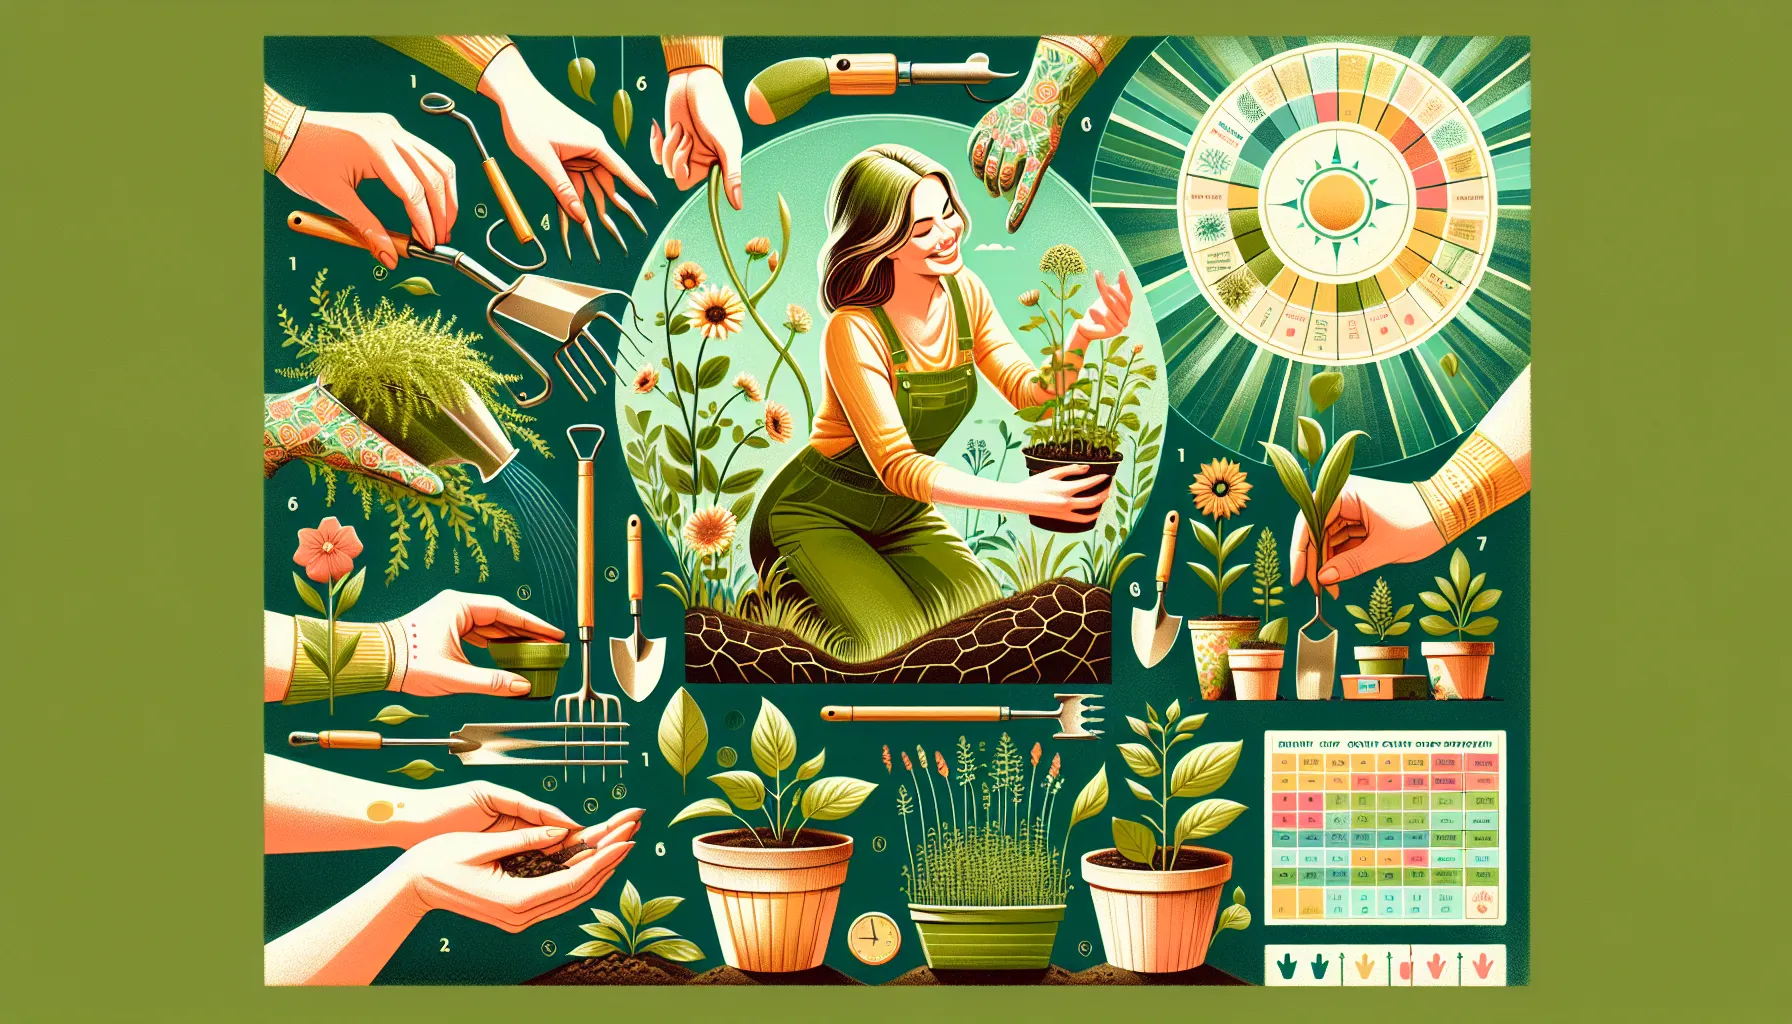 An illustrated guide depicting various steps and tools on how to plant, with a happy person nurturing a plant in the center.